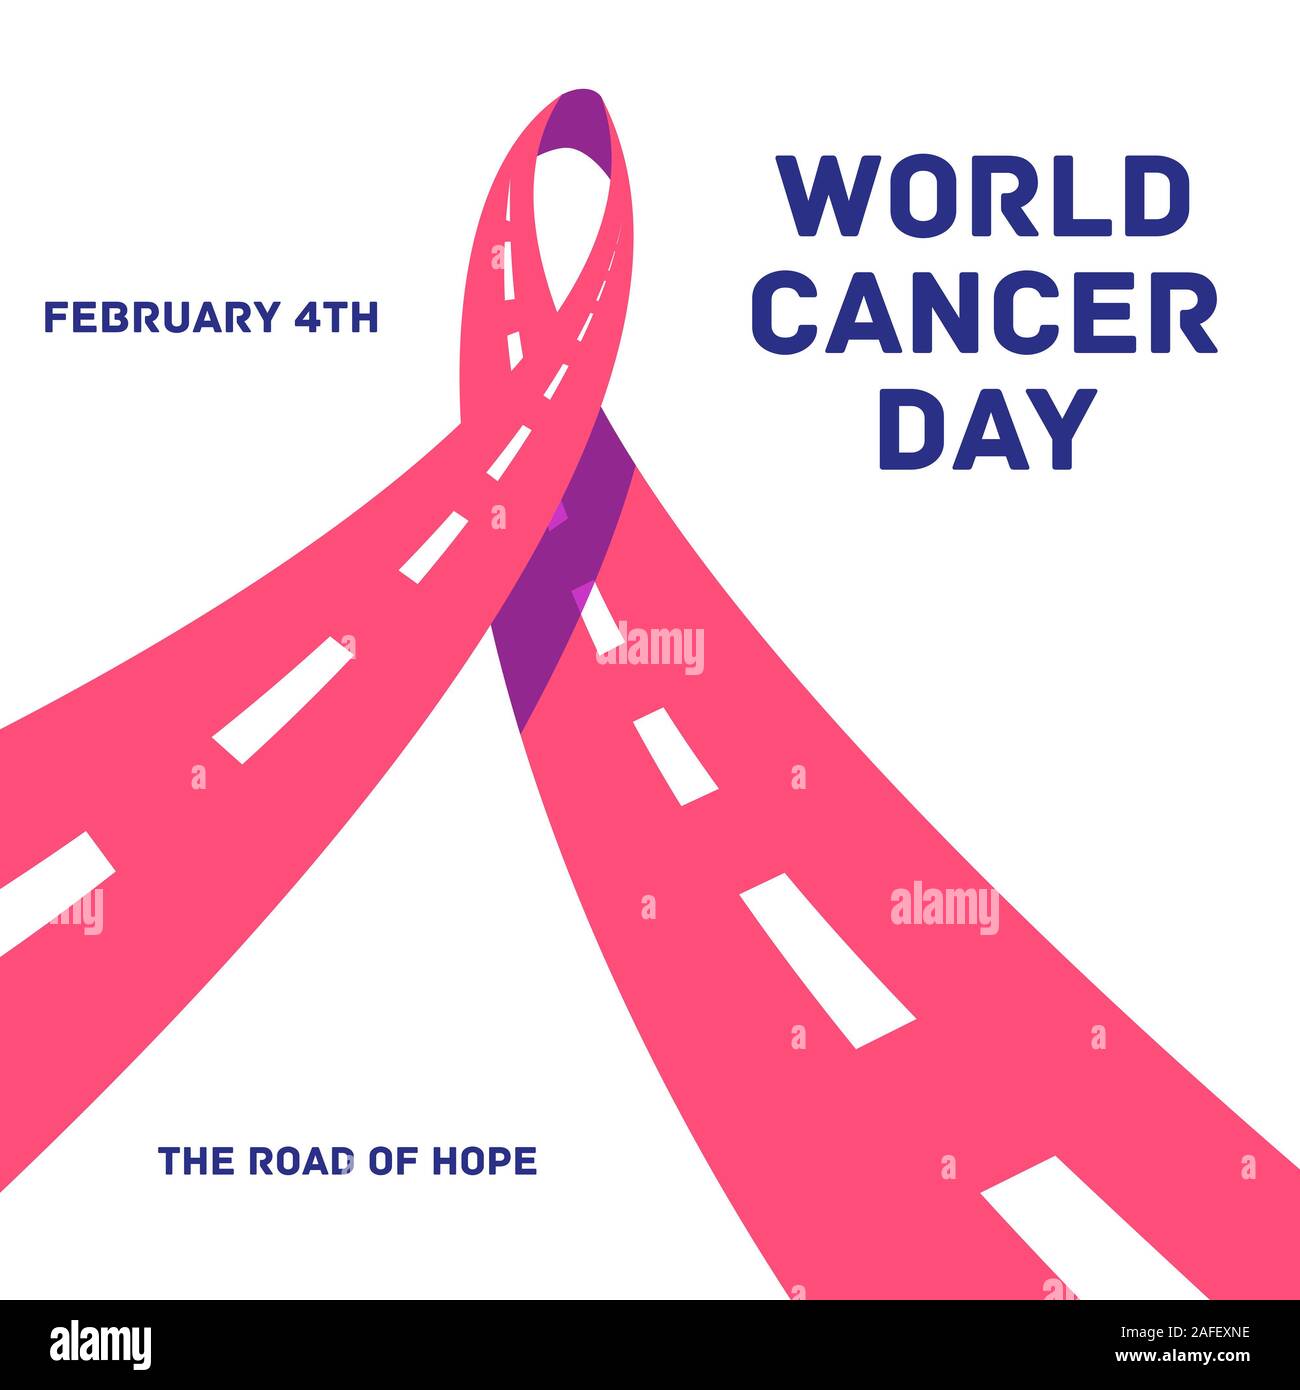 Pink ribbon stylized as the road. World cancer day conceptual illustration. Stock Photo